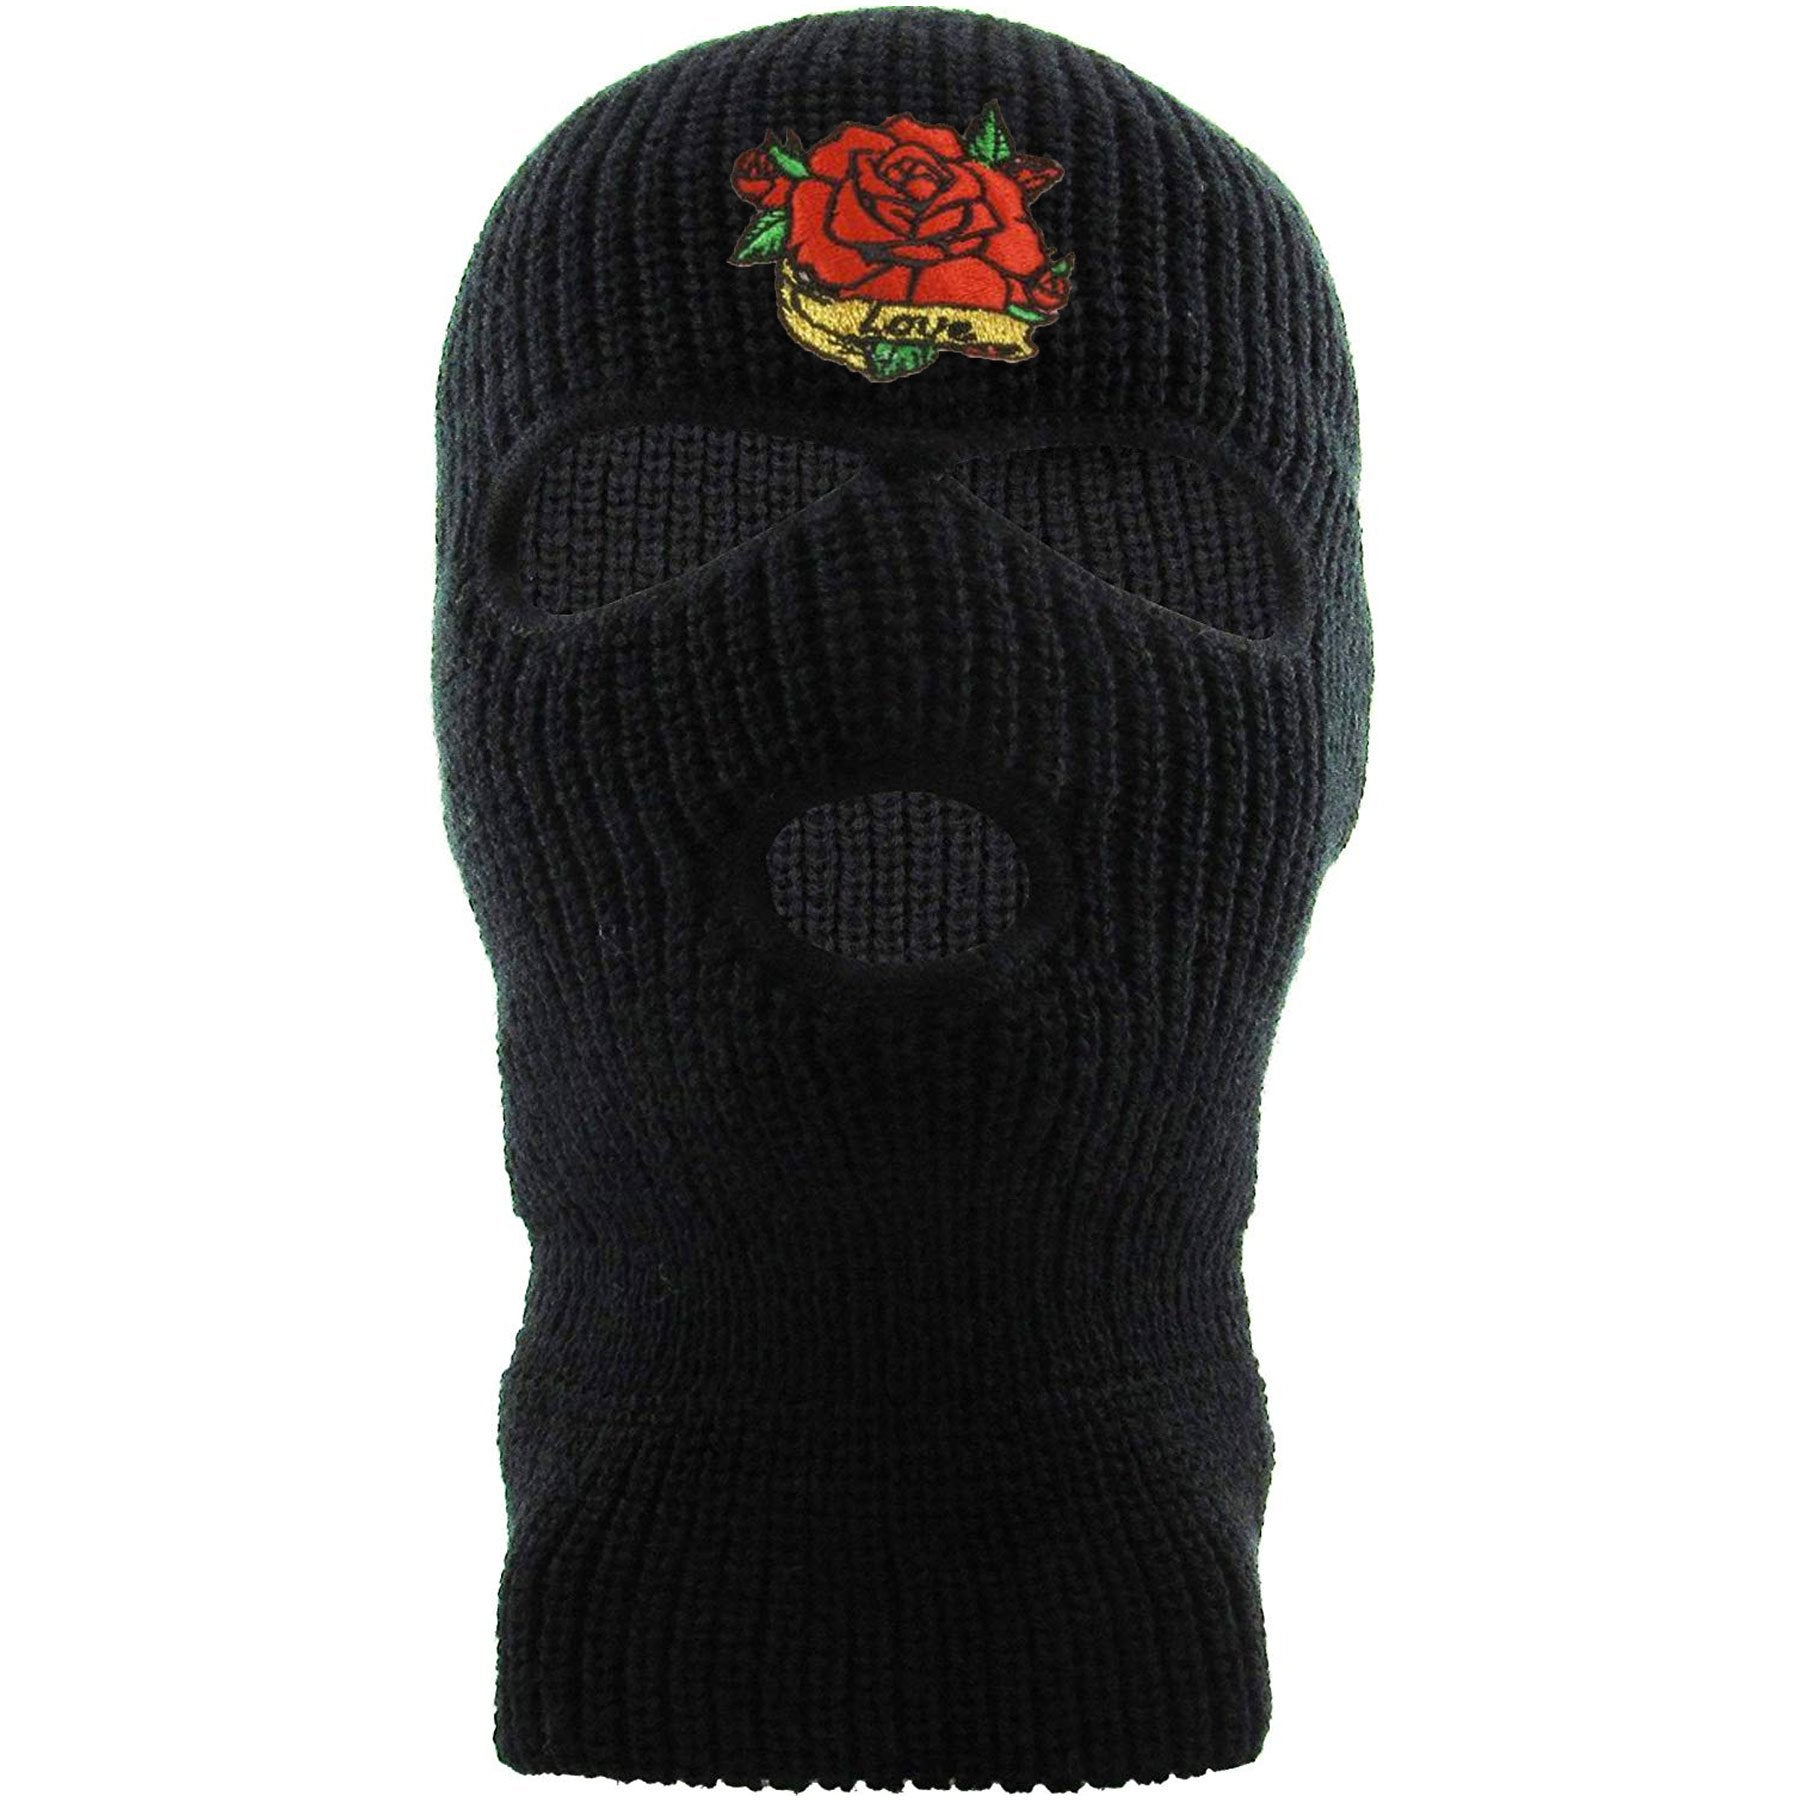 Embroidered on the forehead of the rose love black ski mask is the rose logo with love banner